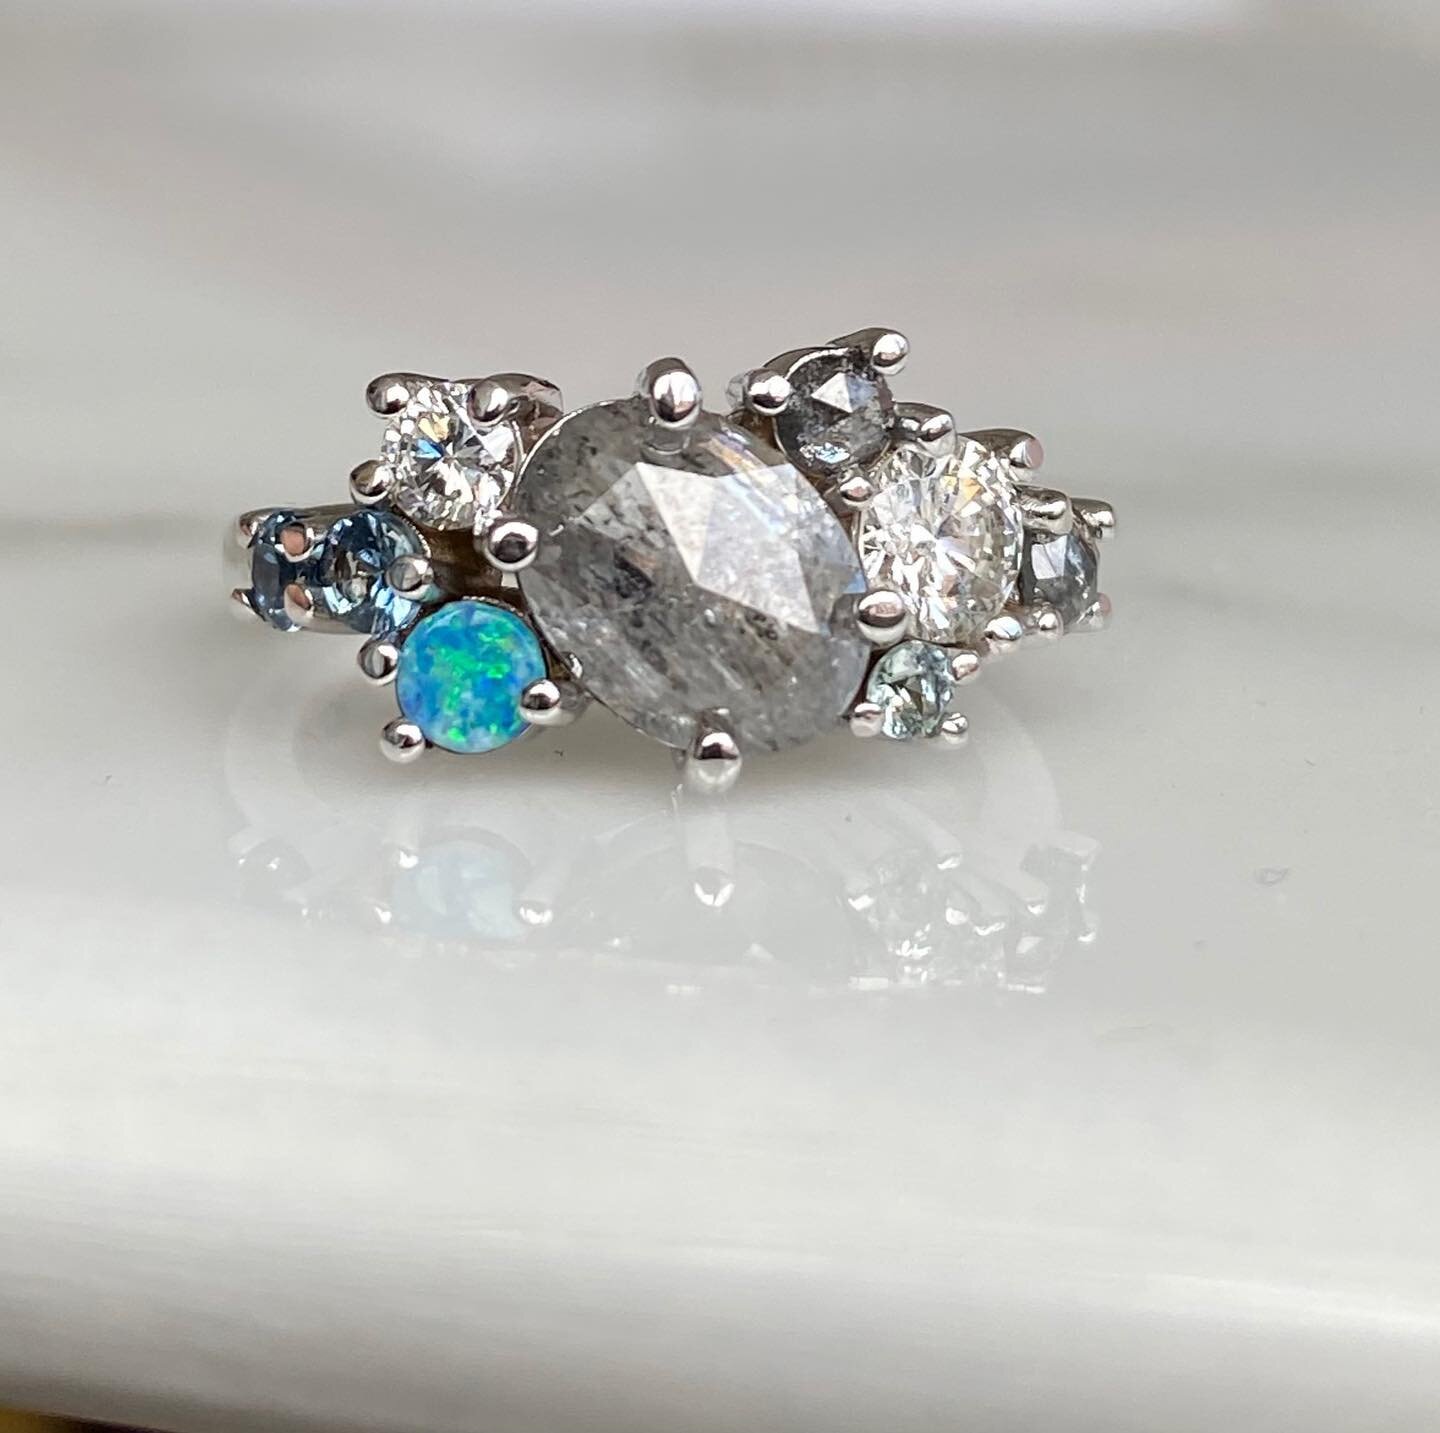 It's grey, gloomy, + rainy this morning - so I choose to stare at something way more beautiful, sparkling, grey + frosty 💎✨
⠀⠀⠀⠀⠀⠀⠀⠀⠀
Another custom ring delivered! holding birthstones of her babies, a special oval center diamond, her original engag